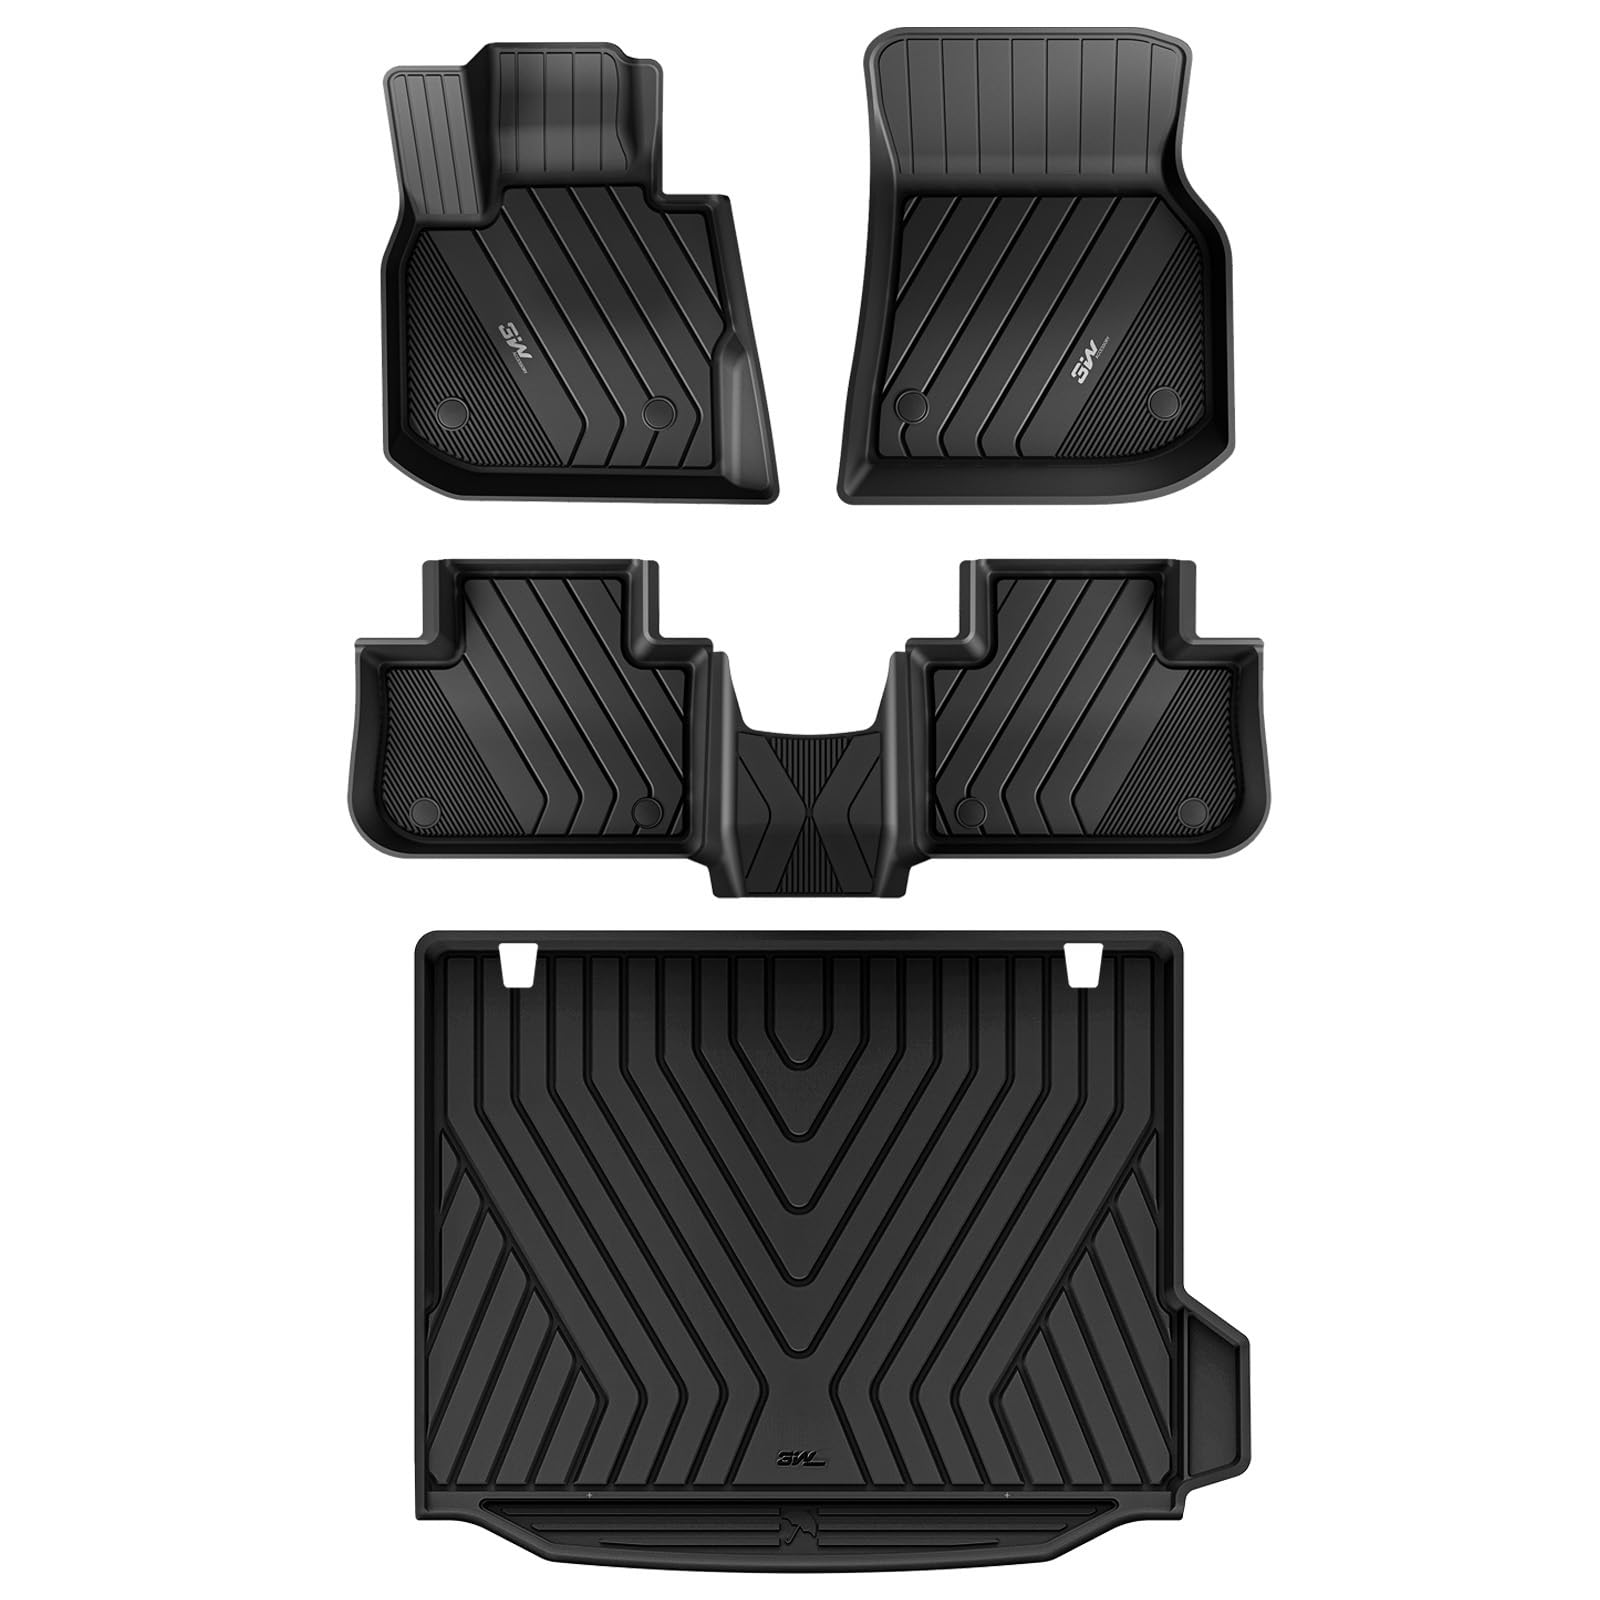 3W BMW 2019-2024 X4 M M40i xDrive30i Floor Mats & Cargo Mats TPE Material & All-Weather Protection Vehicles & Parts 3W 2019-2024 X4 2019-2024 1st&2nd Row+Trunk Mat